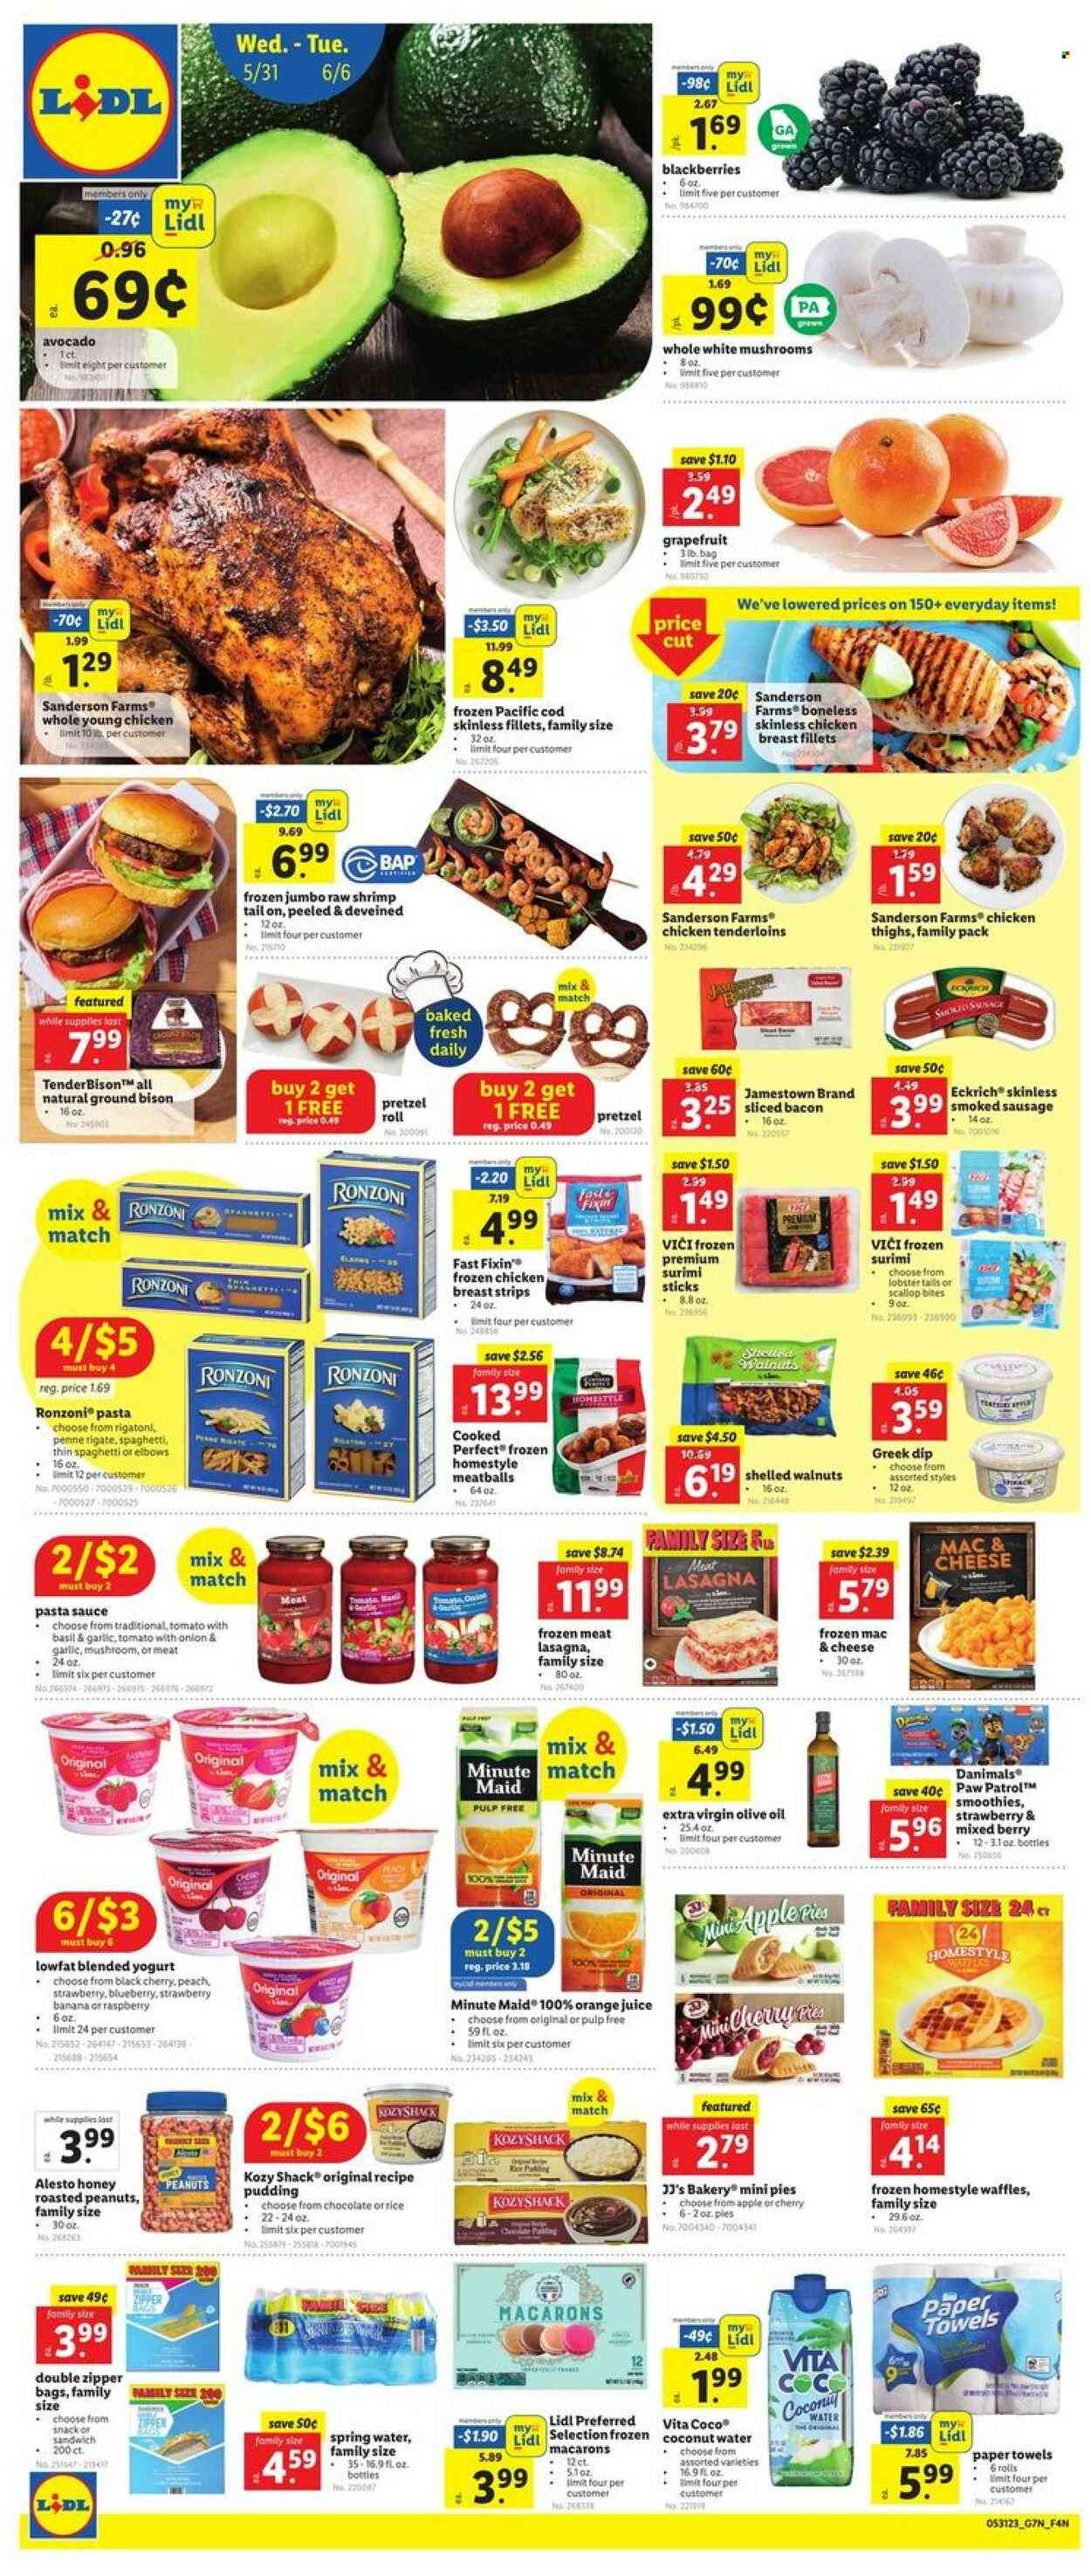 thumbnail - Lidl Flyer - 05/31/2023 - 06/06/2023 - Sales products - mushrooms, Fast Fixin', pretzels, macaroons, waffles, avocado, blackberries, grapefruits, cherries, cod, lobster, scallops, lobster tail, shrimps, spaghetti, pasta sauce, meatballs, sandwich, sauce, lasagna meal, bacon, snack, sausage, smoked sausage, pudding, yoghurt, Danimals, strips, rice, penne, extra virgin olive oil, olive oil, oil, roasted peanuts, walnuts, peanuts, orange juice, juice, coconut water, fruit punch, smoothie, spring water, water, chicken thighs, chicken, bison meat, kitchen towels, paper towels. Page 1.